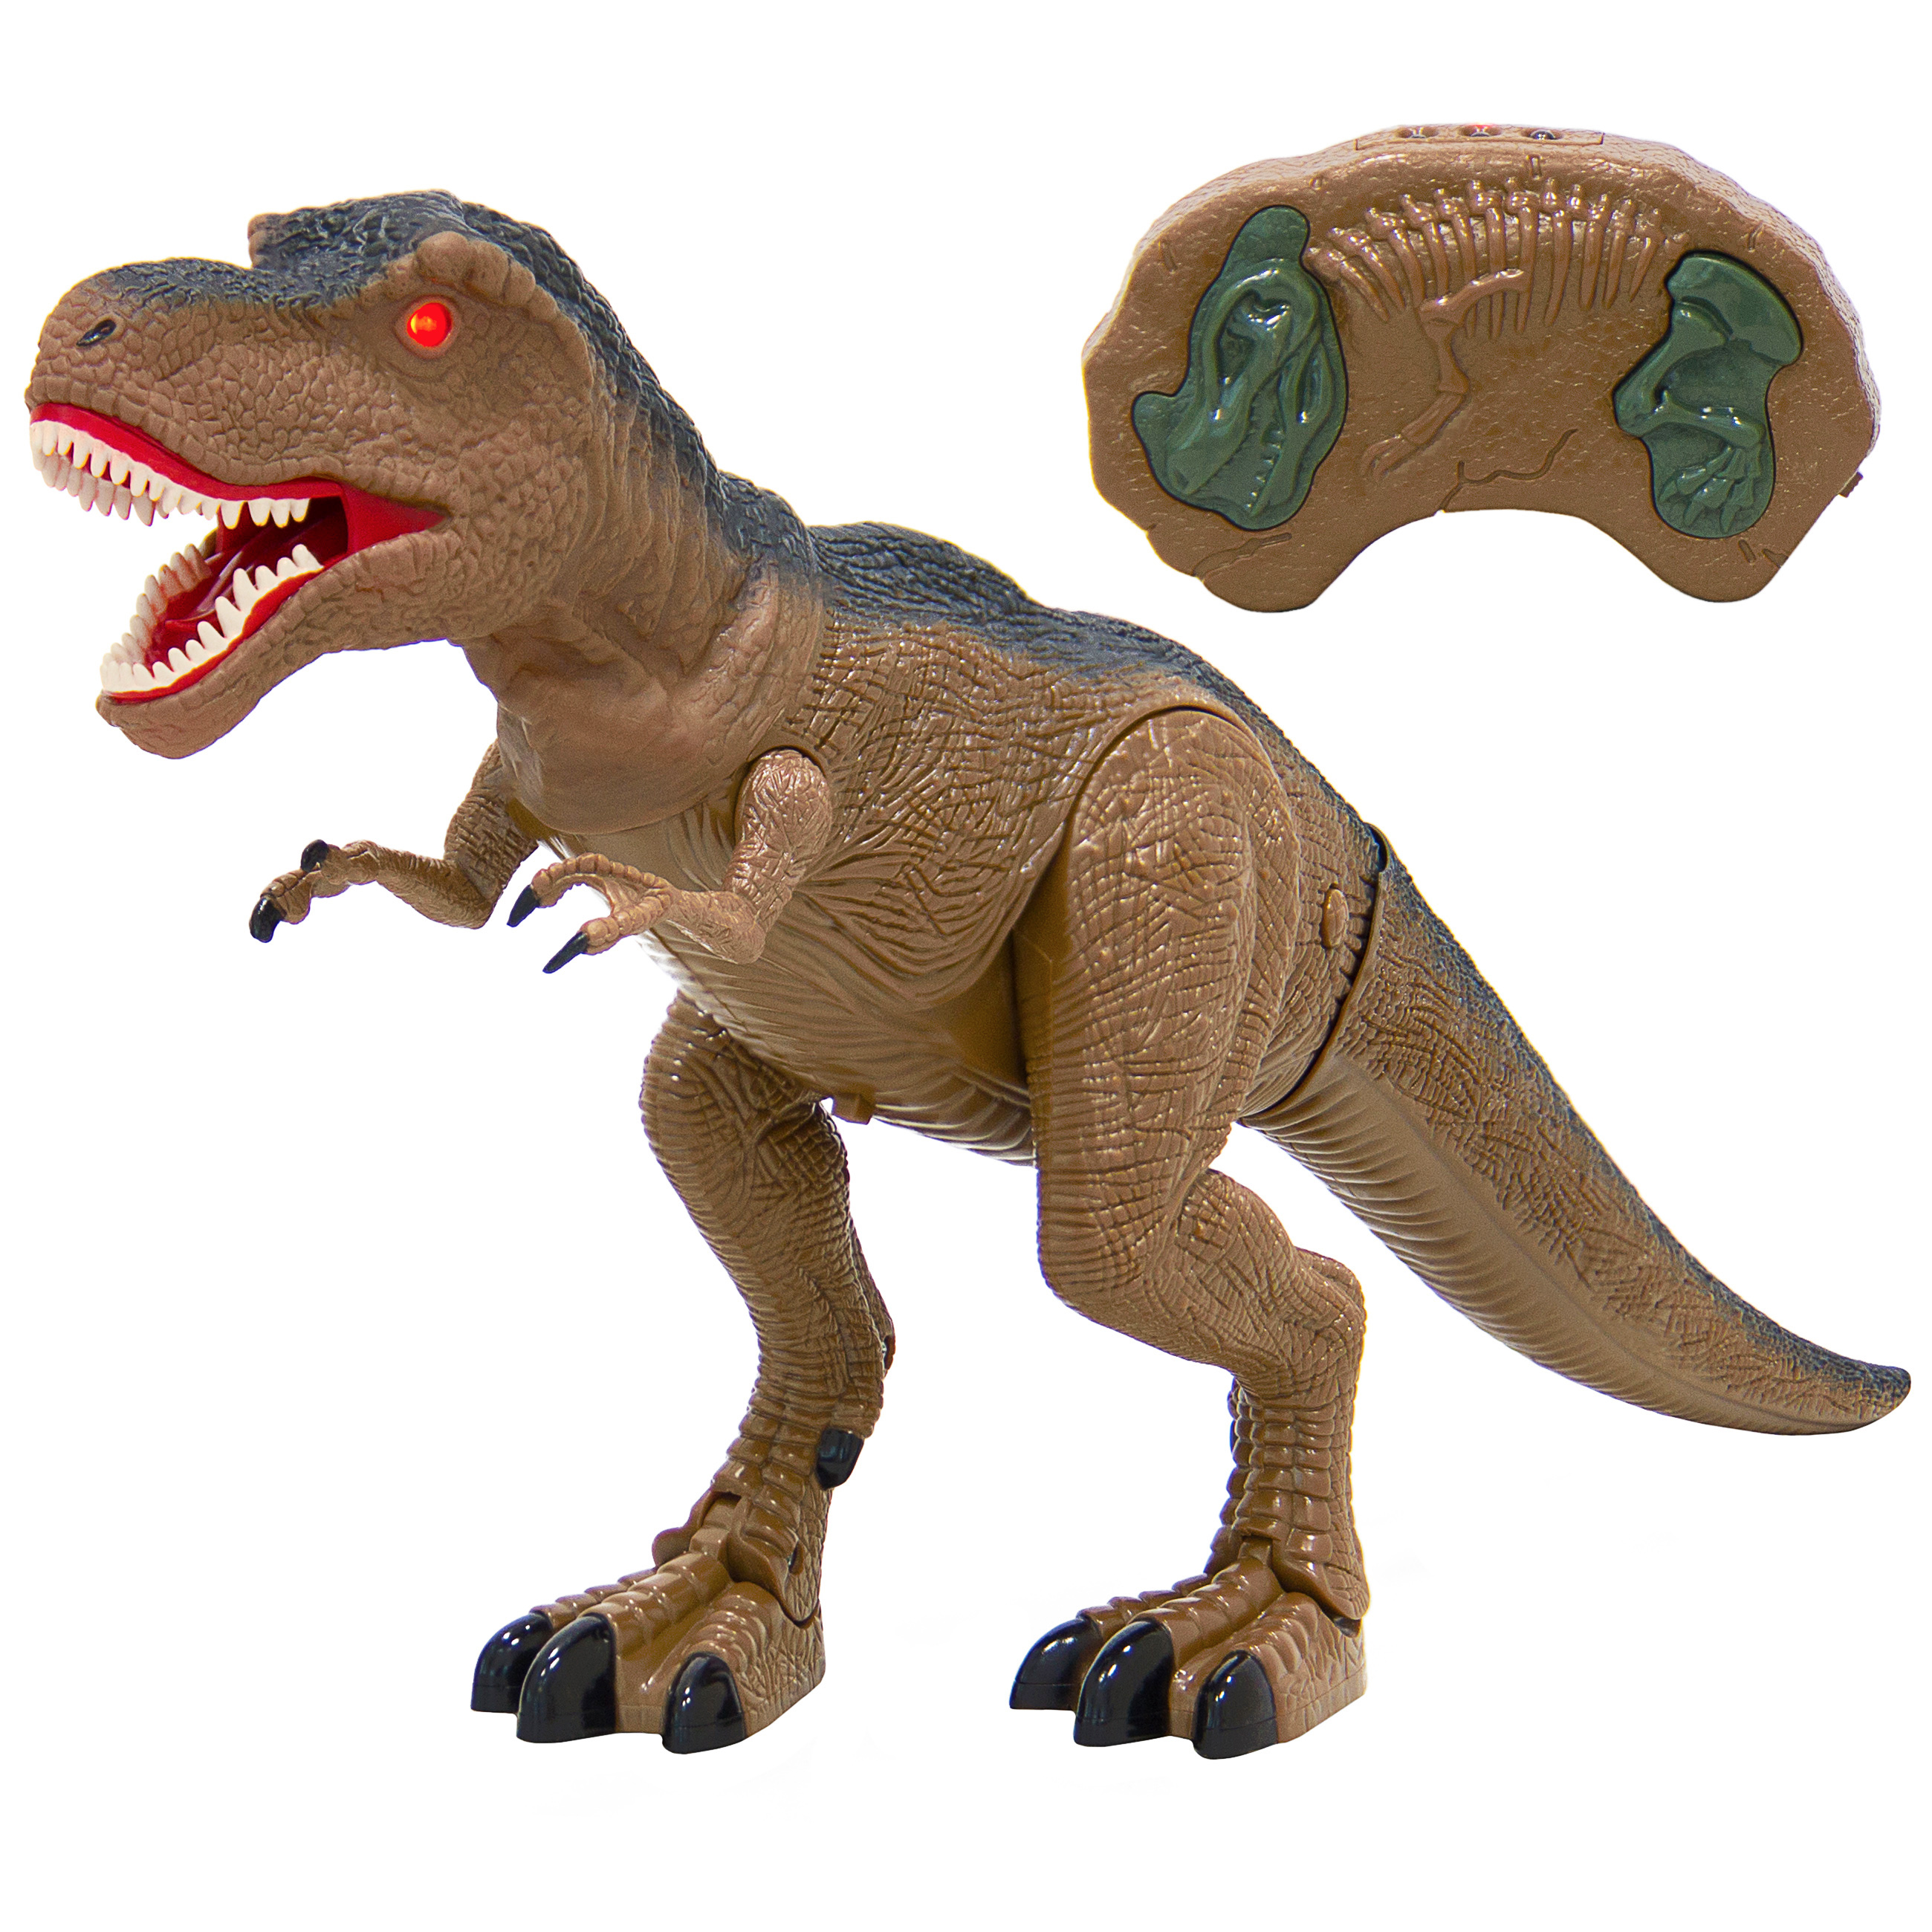 old trex toy